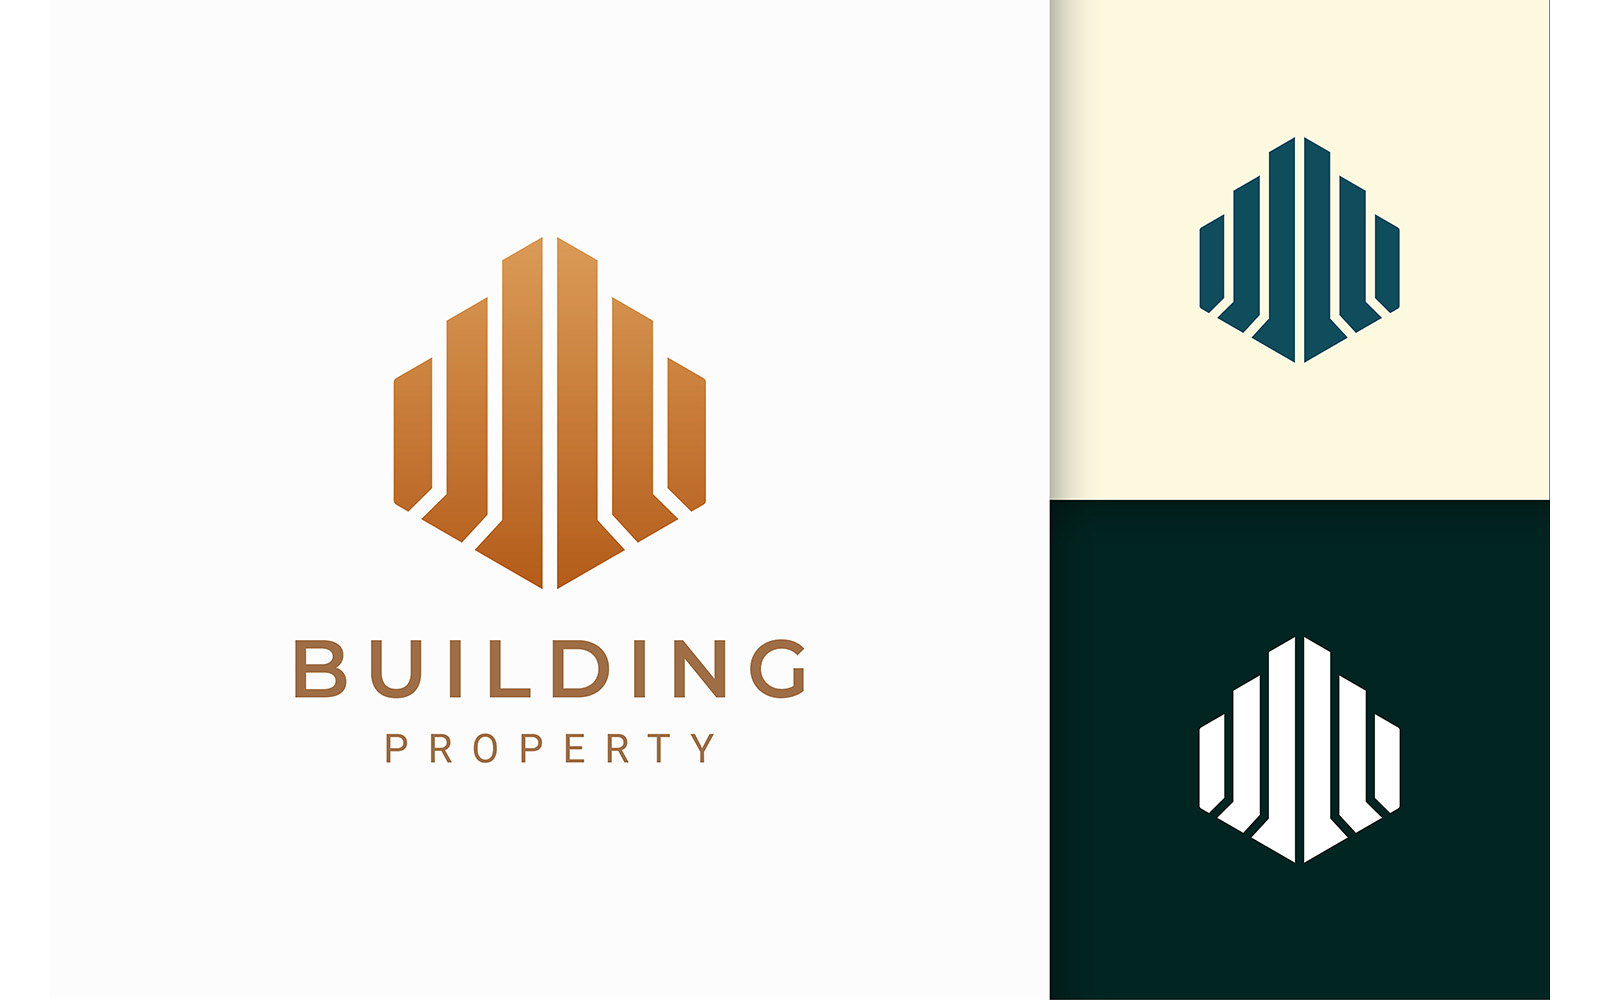 Hotel or Apartment Logo Template